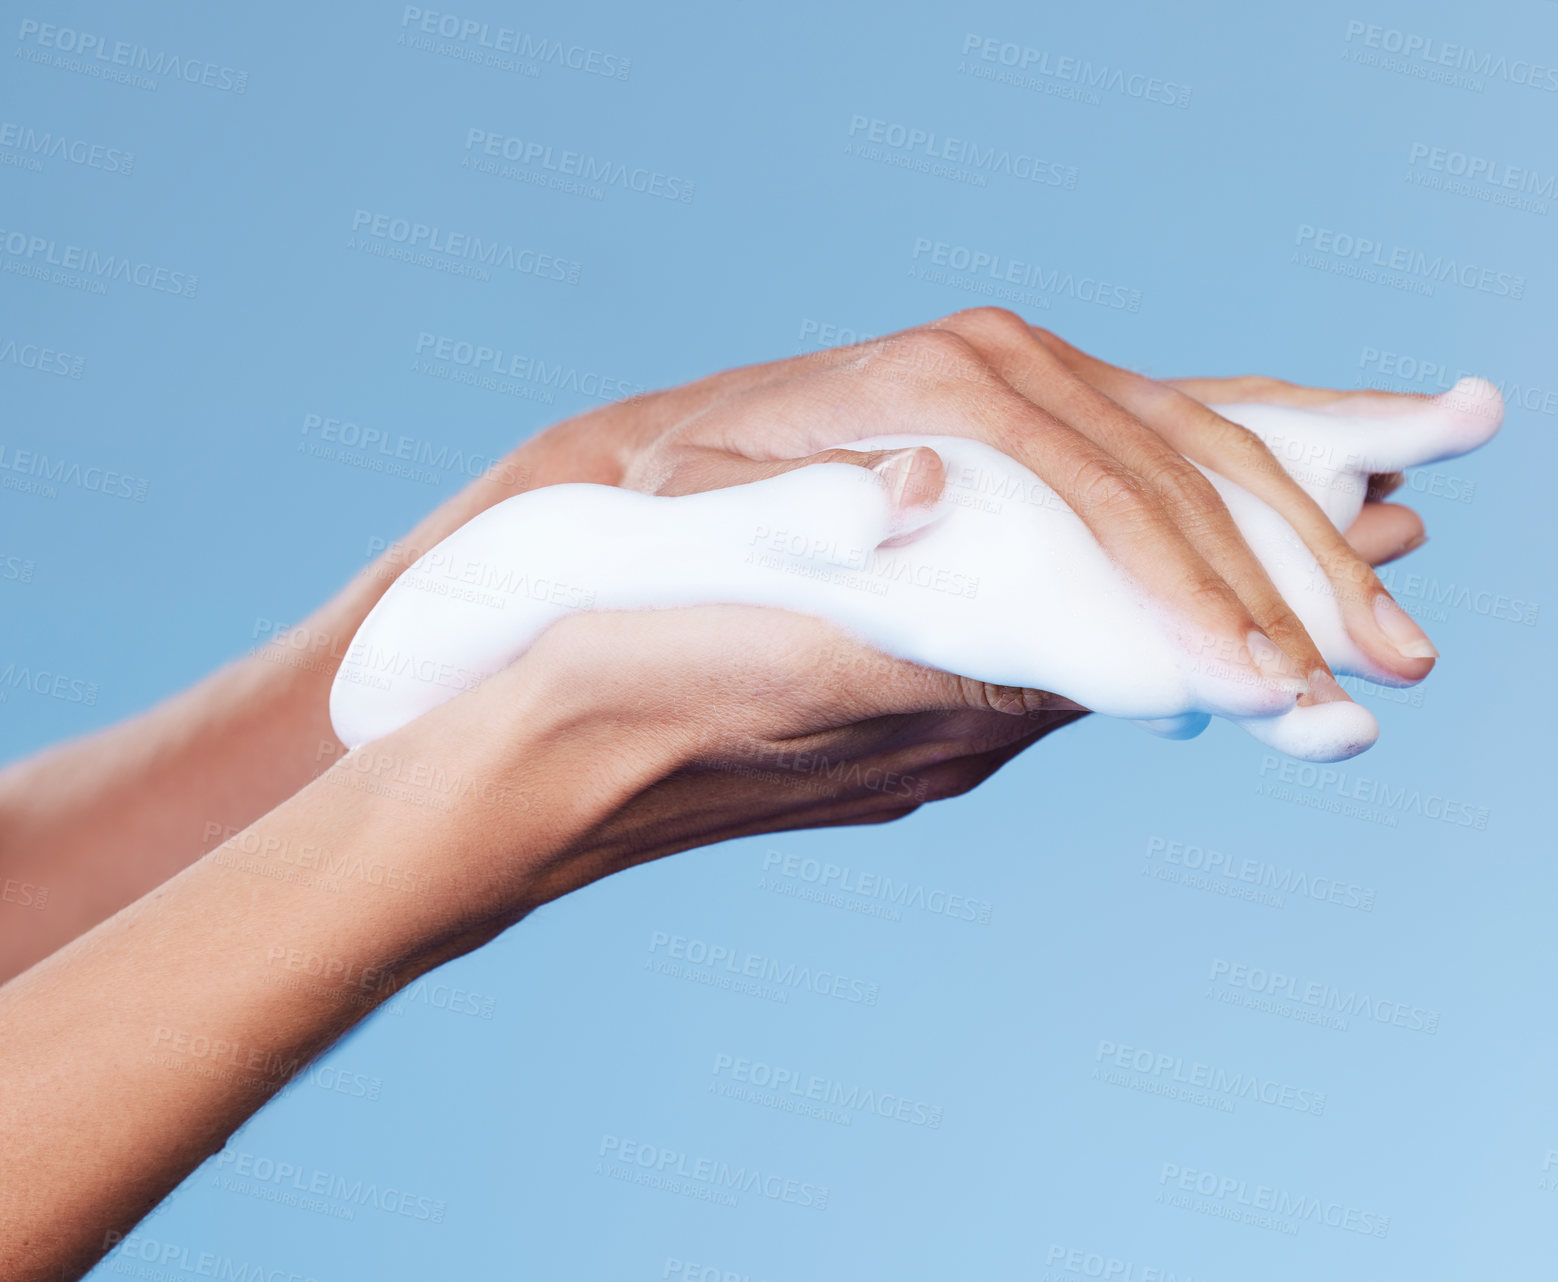 Buy stock photo Studio shot of an unrecognisable woman rubbing soap on her hands against a blue background